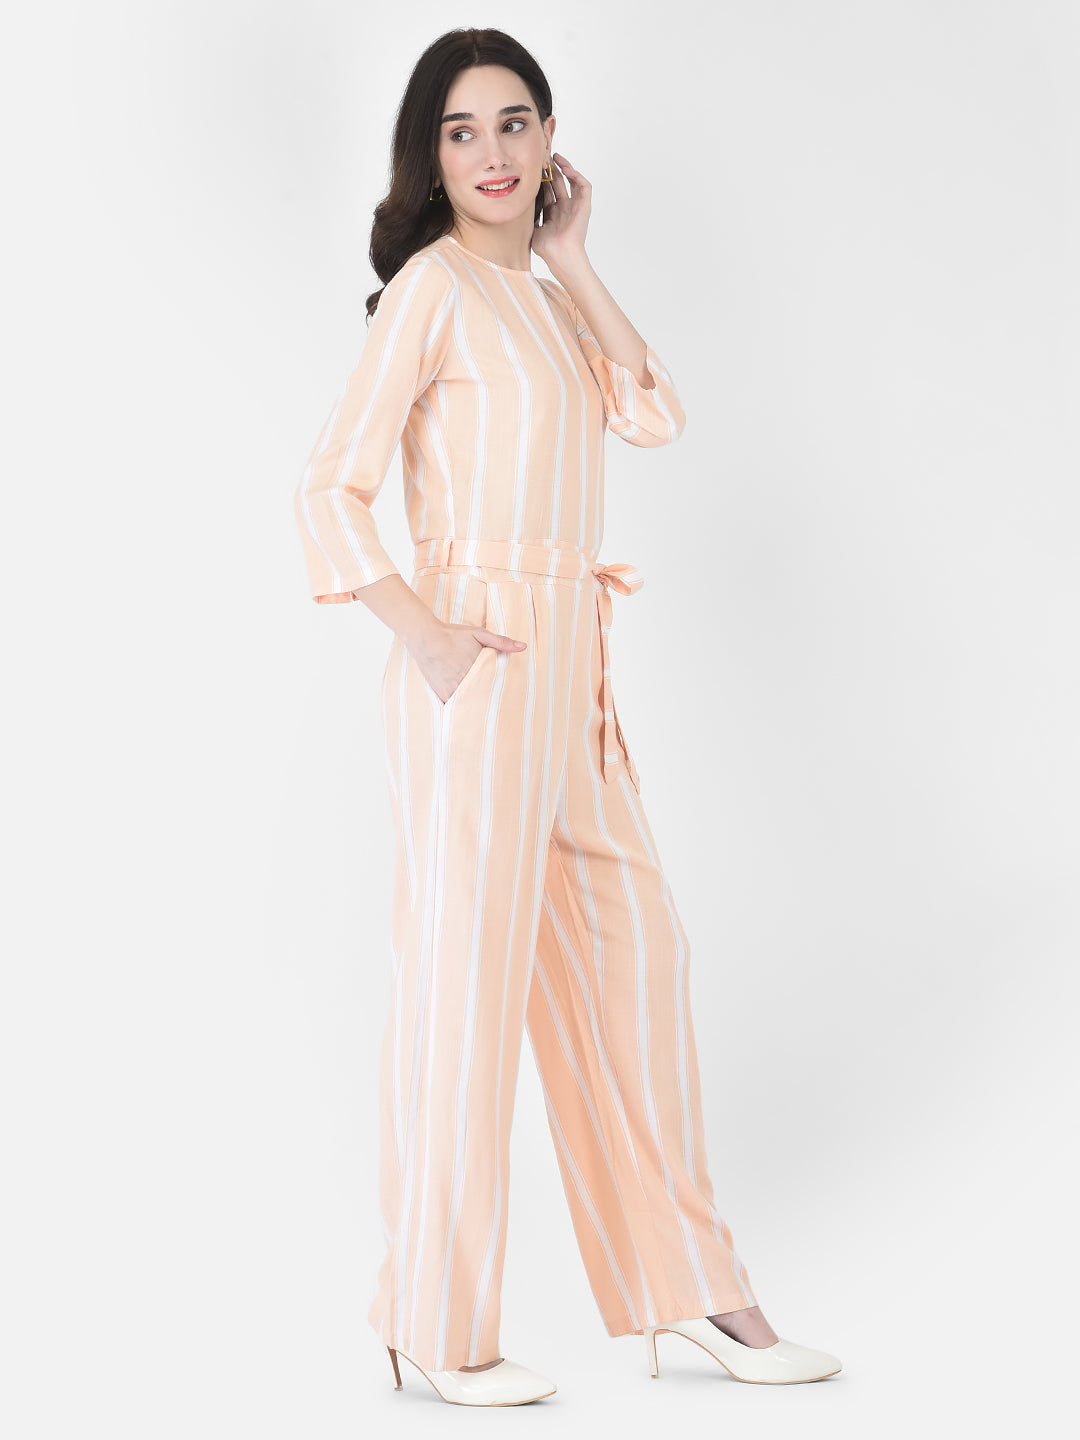 Peach Striped Jumpsuit - Women Dungarees